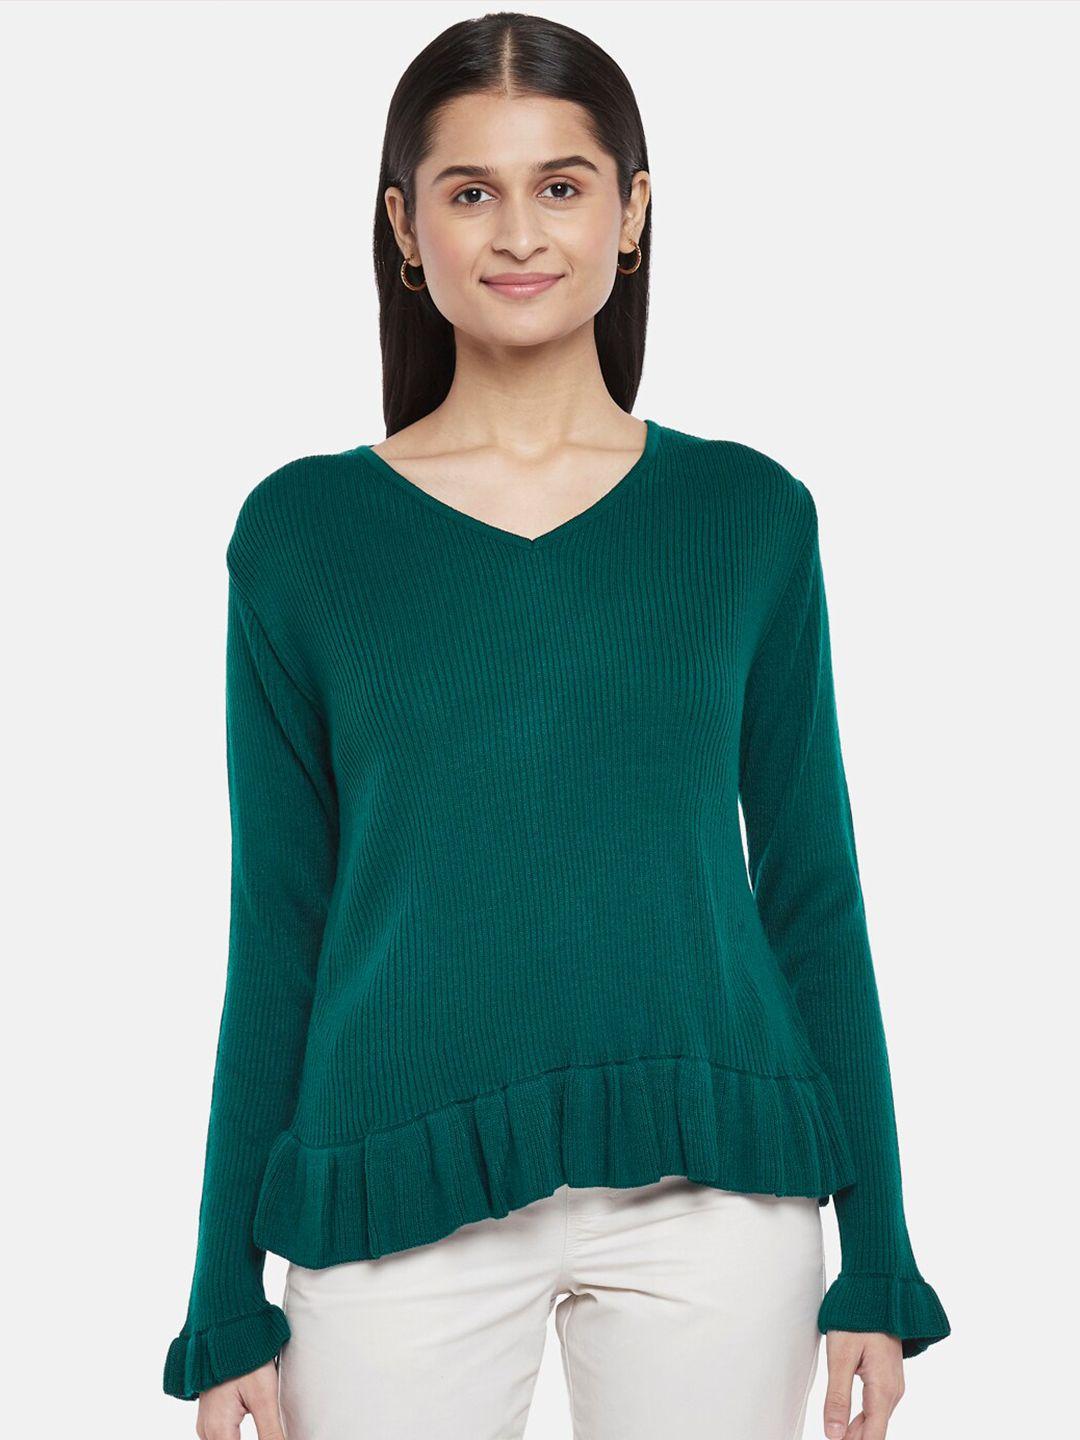 honey by pantaloons green regular top with pleated detail